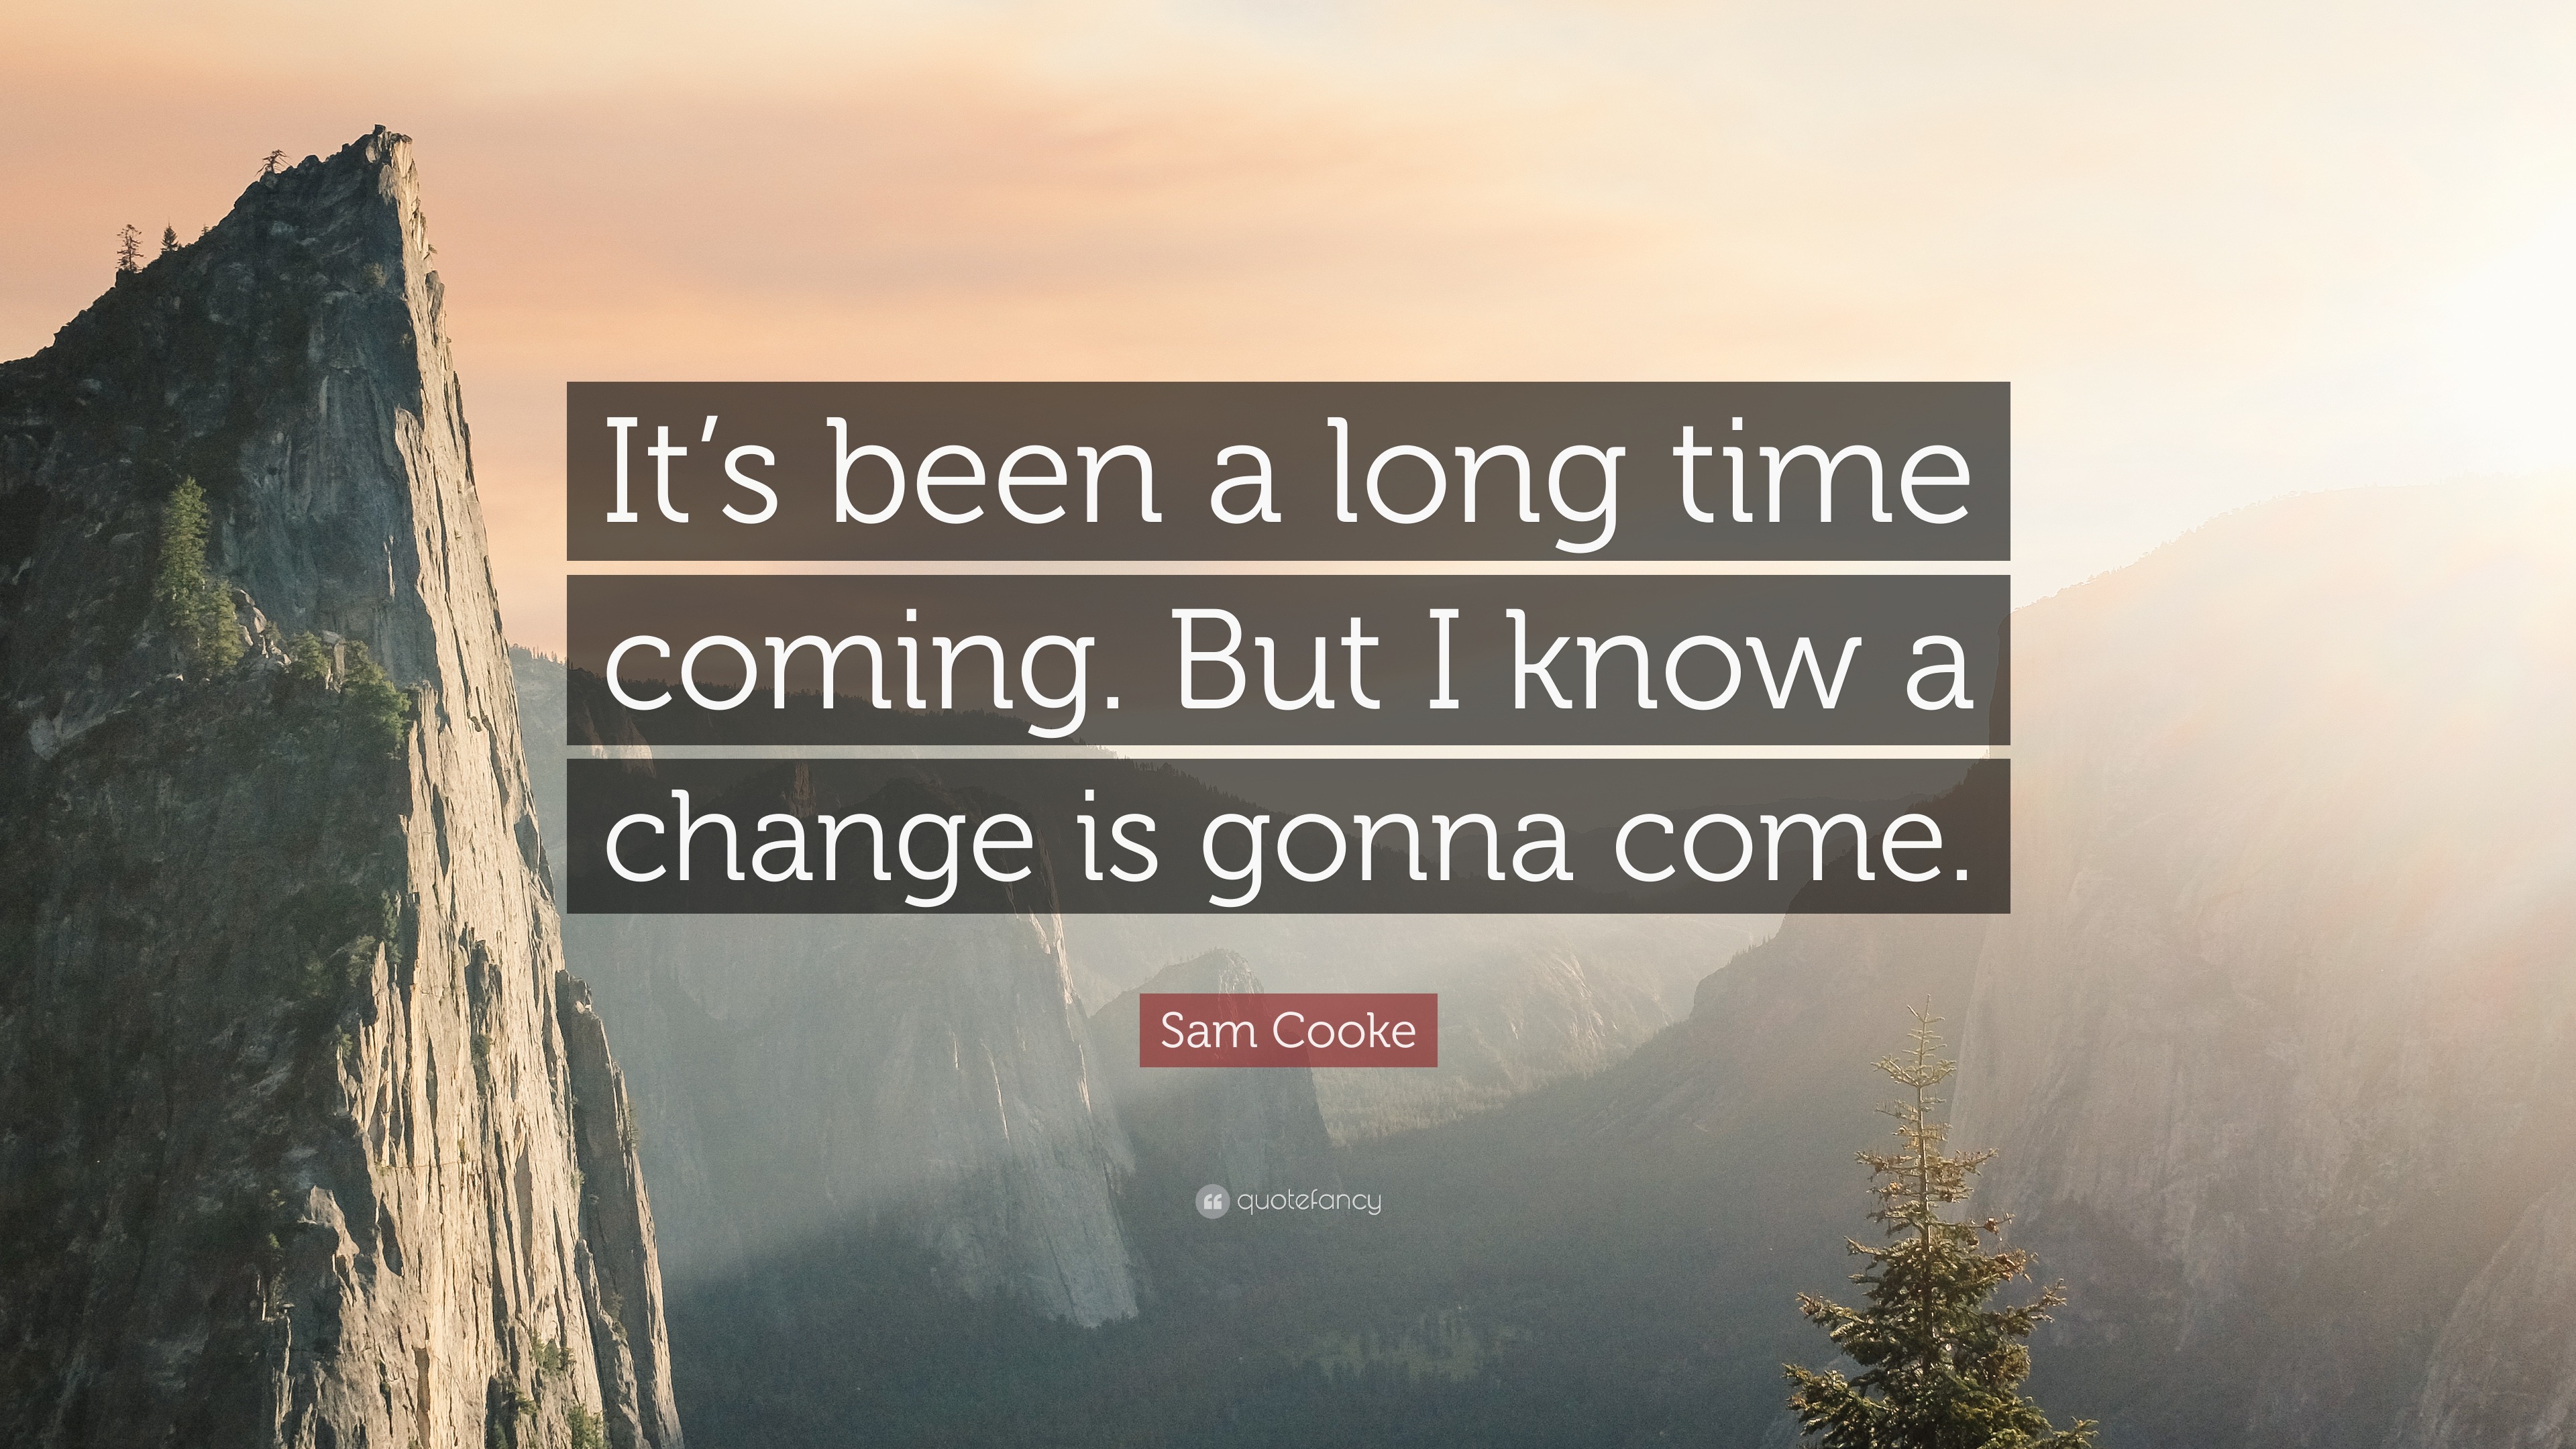 https://quotefancy.com/media/wallpaper/3840x2160/4809783-Sam-Cooke-Quote-It-s-been-a-long-time-coming-But-I-know-a-change.jpg